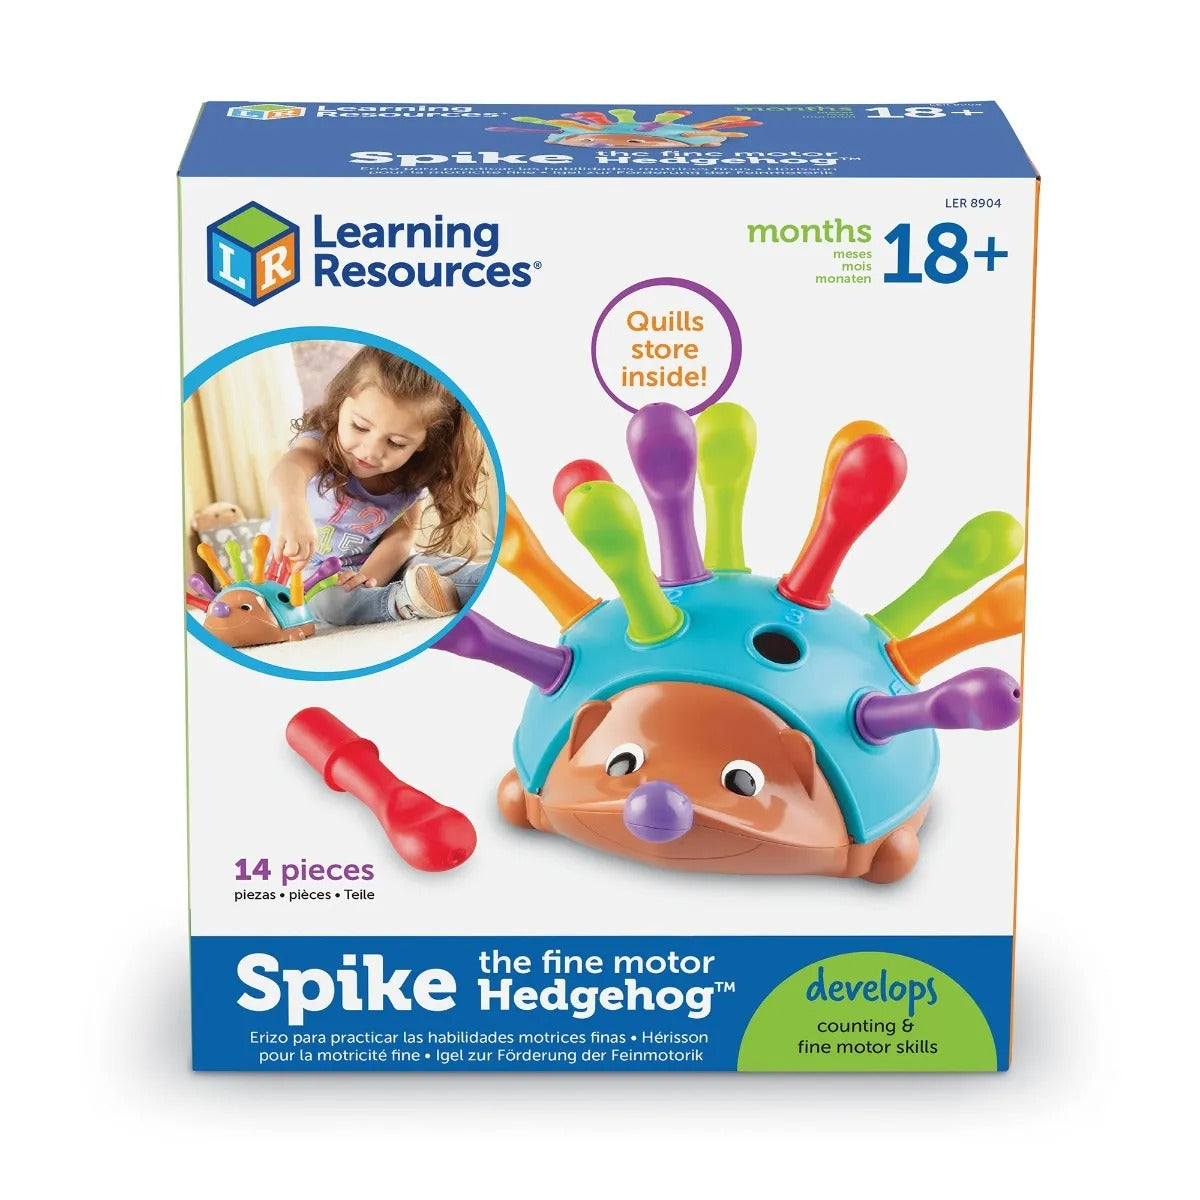 Spike the Fine Motor Hedgehog, Spike the Fine Motor Hedgehog lost his quills, and only your little ones can help him get them back! New from Learning Resources, Spike the Fine Motor Hedgehog helps kids build up hand muscles and fine motor skills as they replace the chunky, peg-shaped “quills” within the holes that dot the smiling hedgehog’s back. The learning doesn’t end there—Spike the Fine Motor Hedgehog colourful quills also lend themselves well to lessons in counting, sorting, and colour identification 